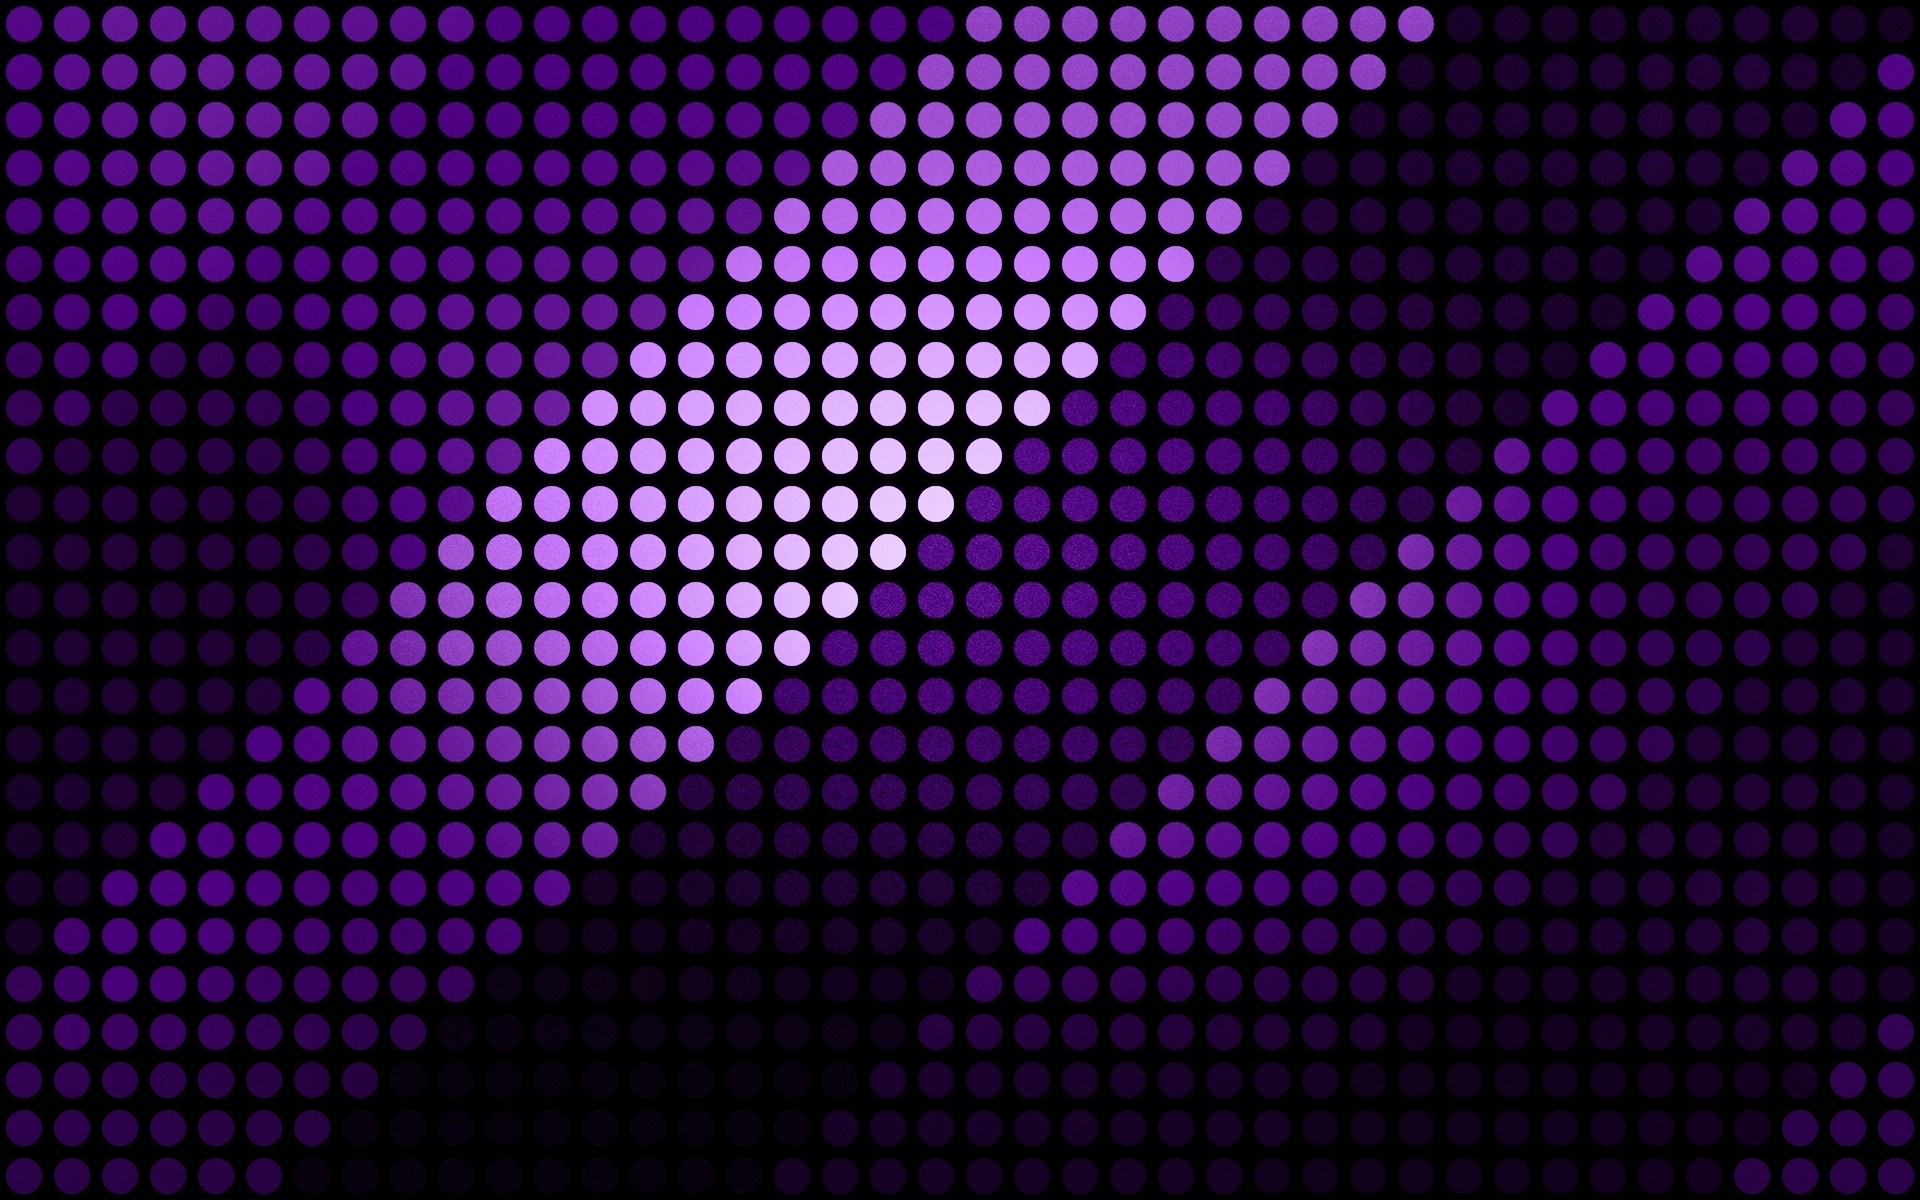 1920x1200 HD purple wallpaper image to use as background-1